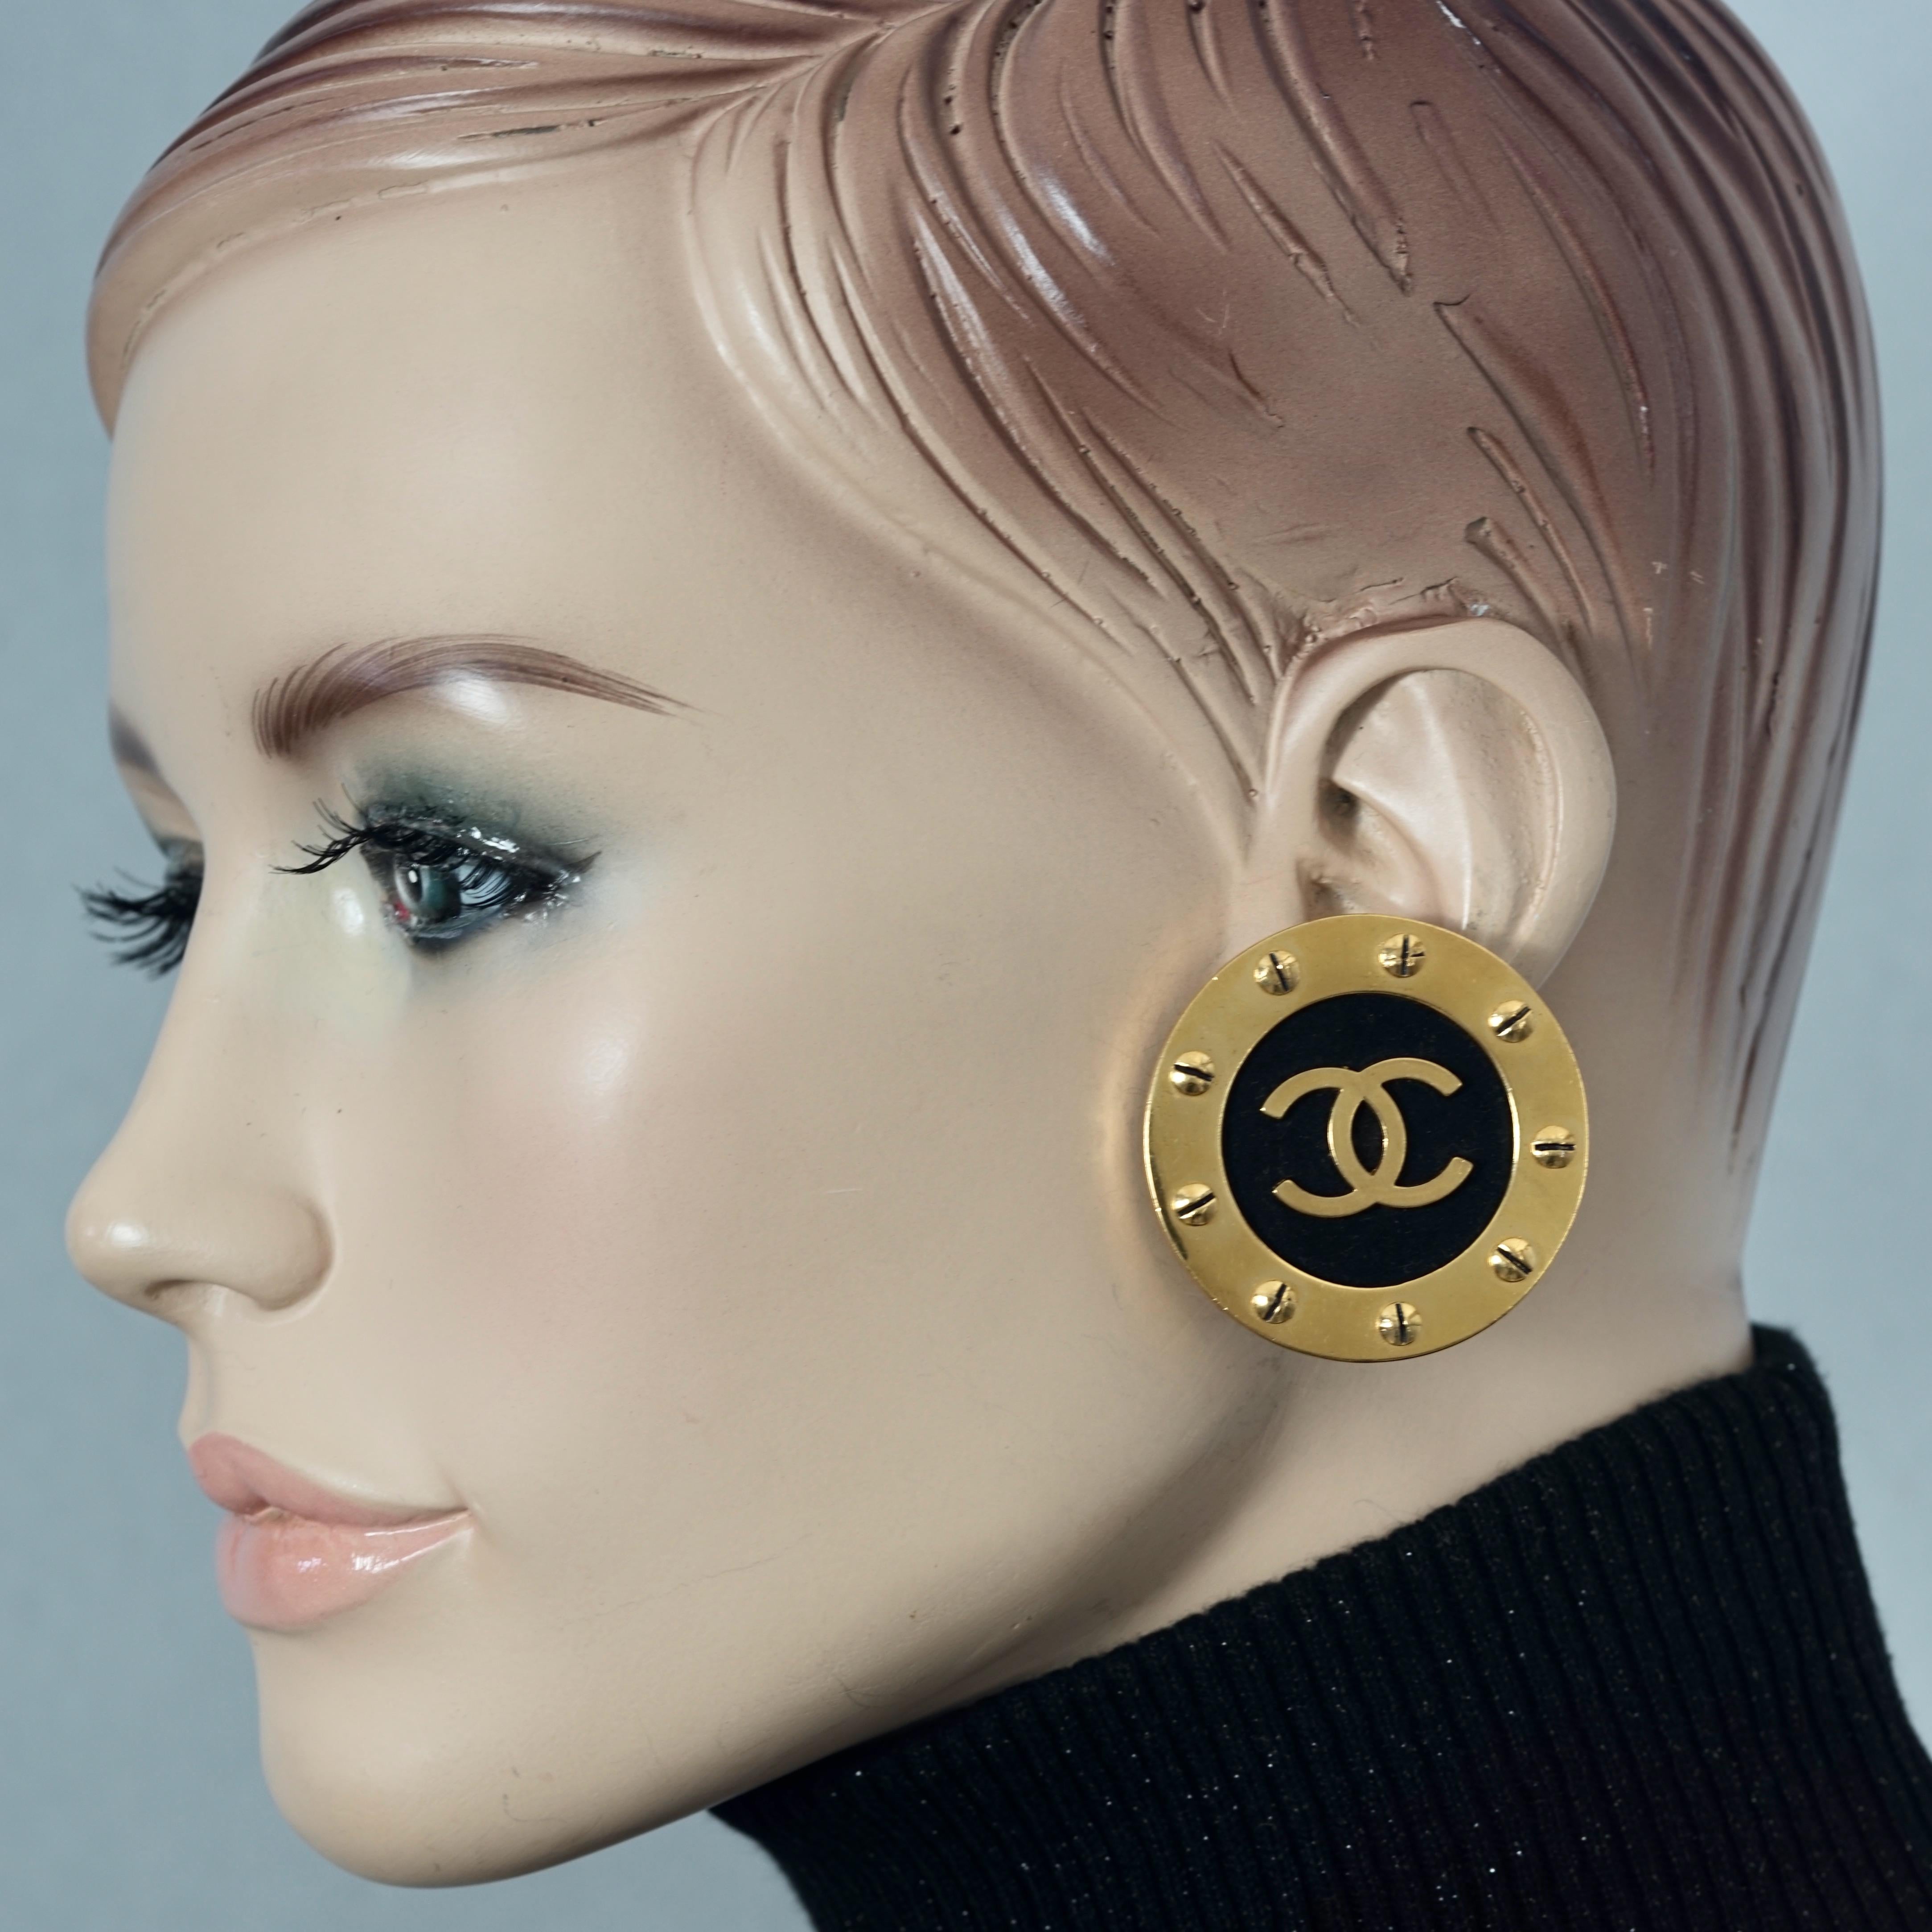 Vintage Jumbo CHANEL CC Logo Screw Disc Earrings

Measurements:
Height: 1.65 inches (4.2 cm)
Width: 1.65 inches (4.2 cm)
Weight per Earring: 25 grams

Features:
- 100% Authentic CHANEL.
- Jumbo Chanel disc earrings with screw embellishments, black